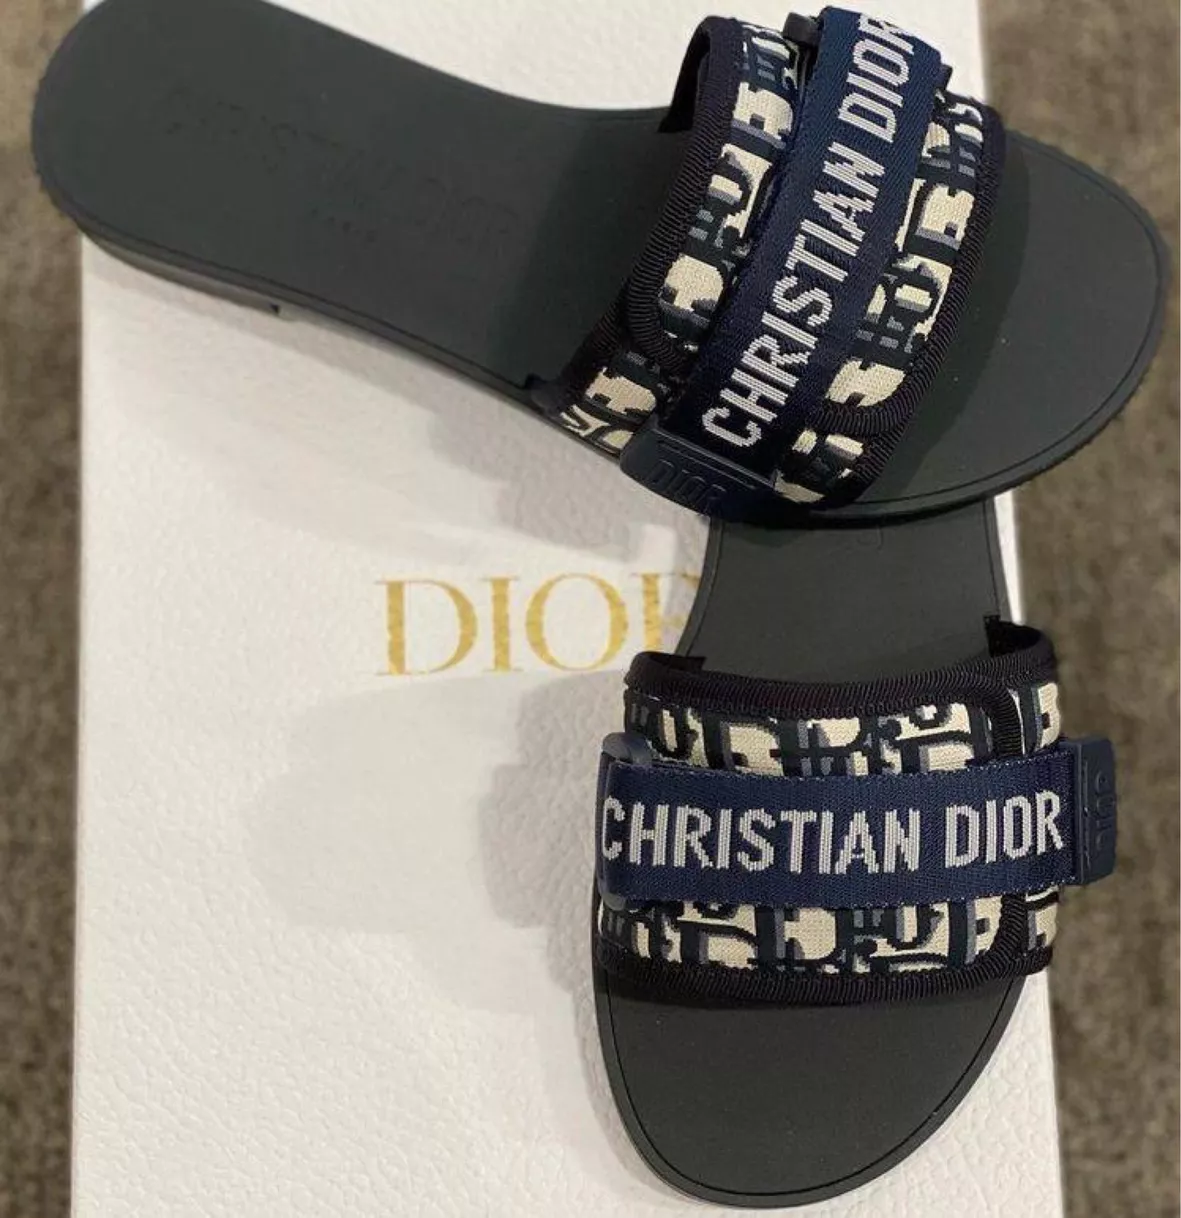 dhgate's Dior Collection on LTK